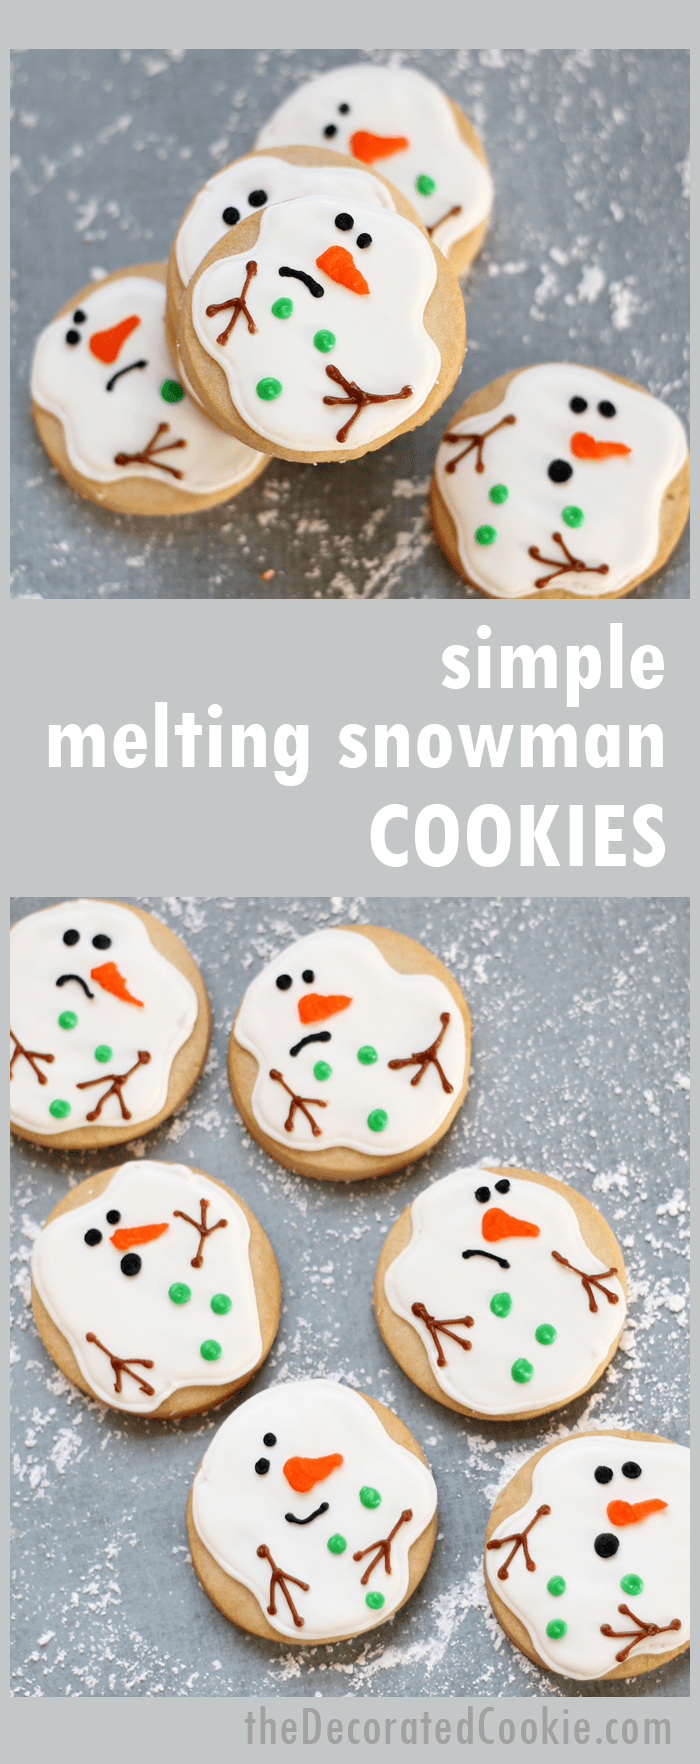 how to decorate simple melting snowman cookies from the creator of the ORIGINAL melting snowman cookie 